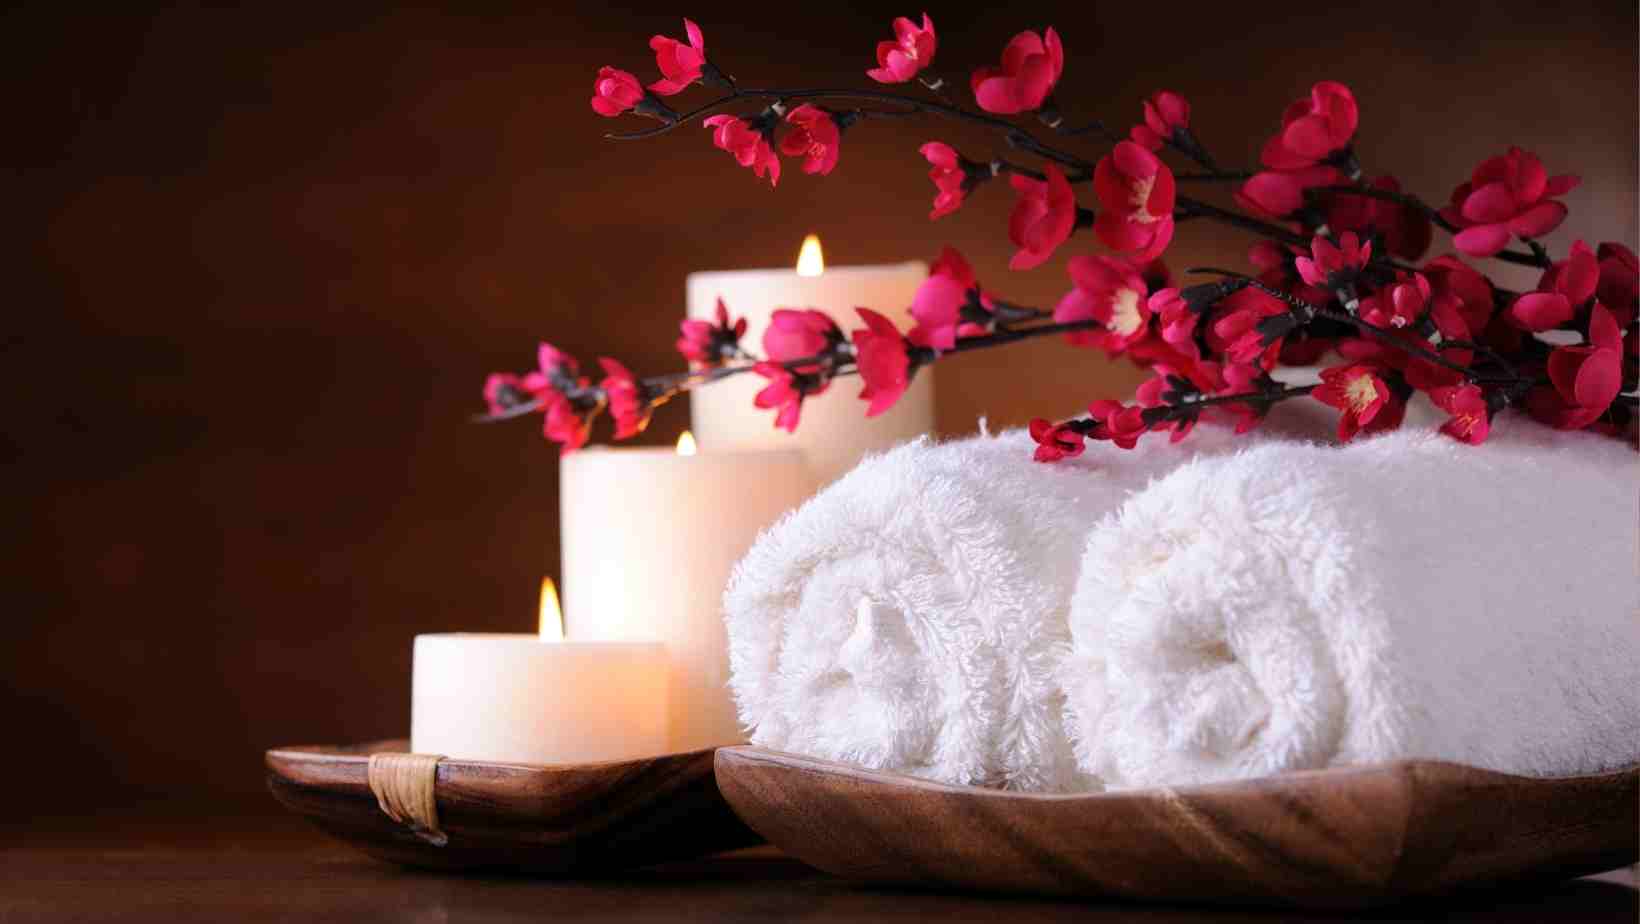 A stock image from Canva showing towels and a candle representing a relaxing spa break in Essex